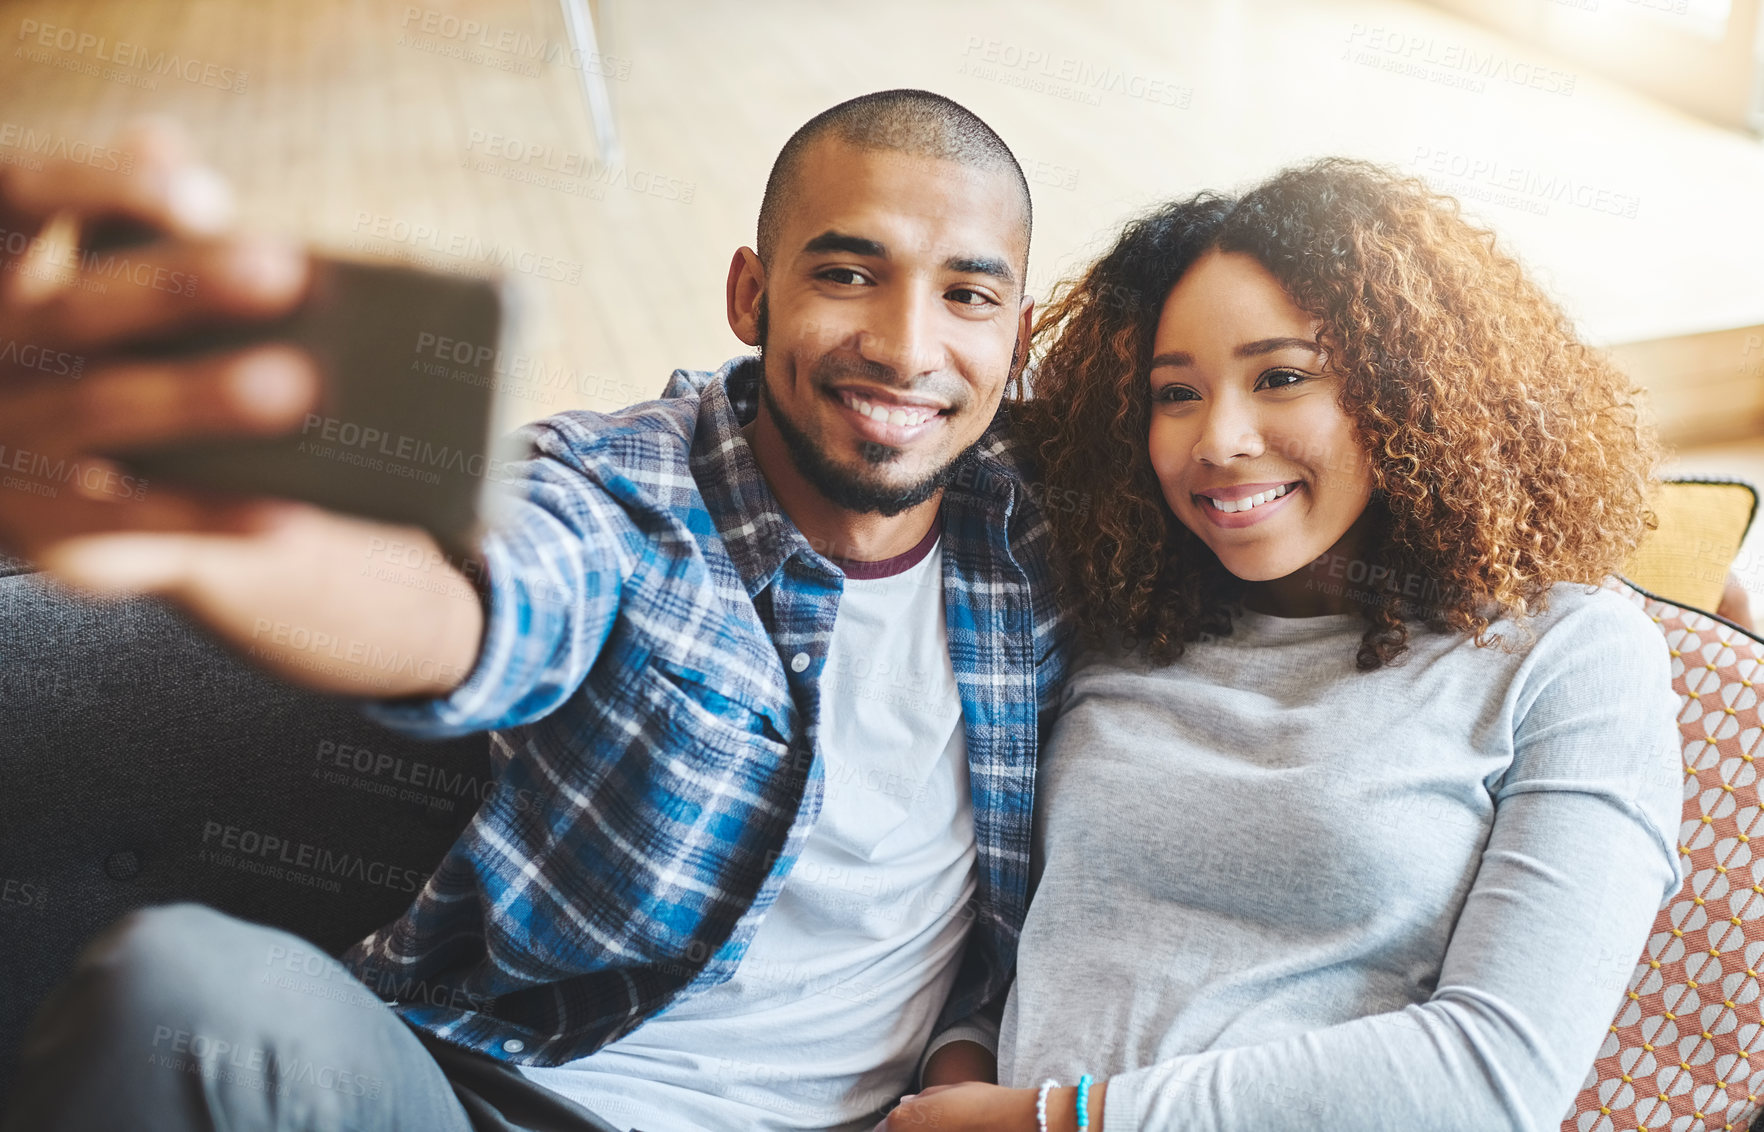 Buy stock photo Smiling couple taking selfie photo on phone together for memories of a romantic relationship while looking relaxed at home. A young trendy dating boyfriend and girlfriend taking a portrait picture